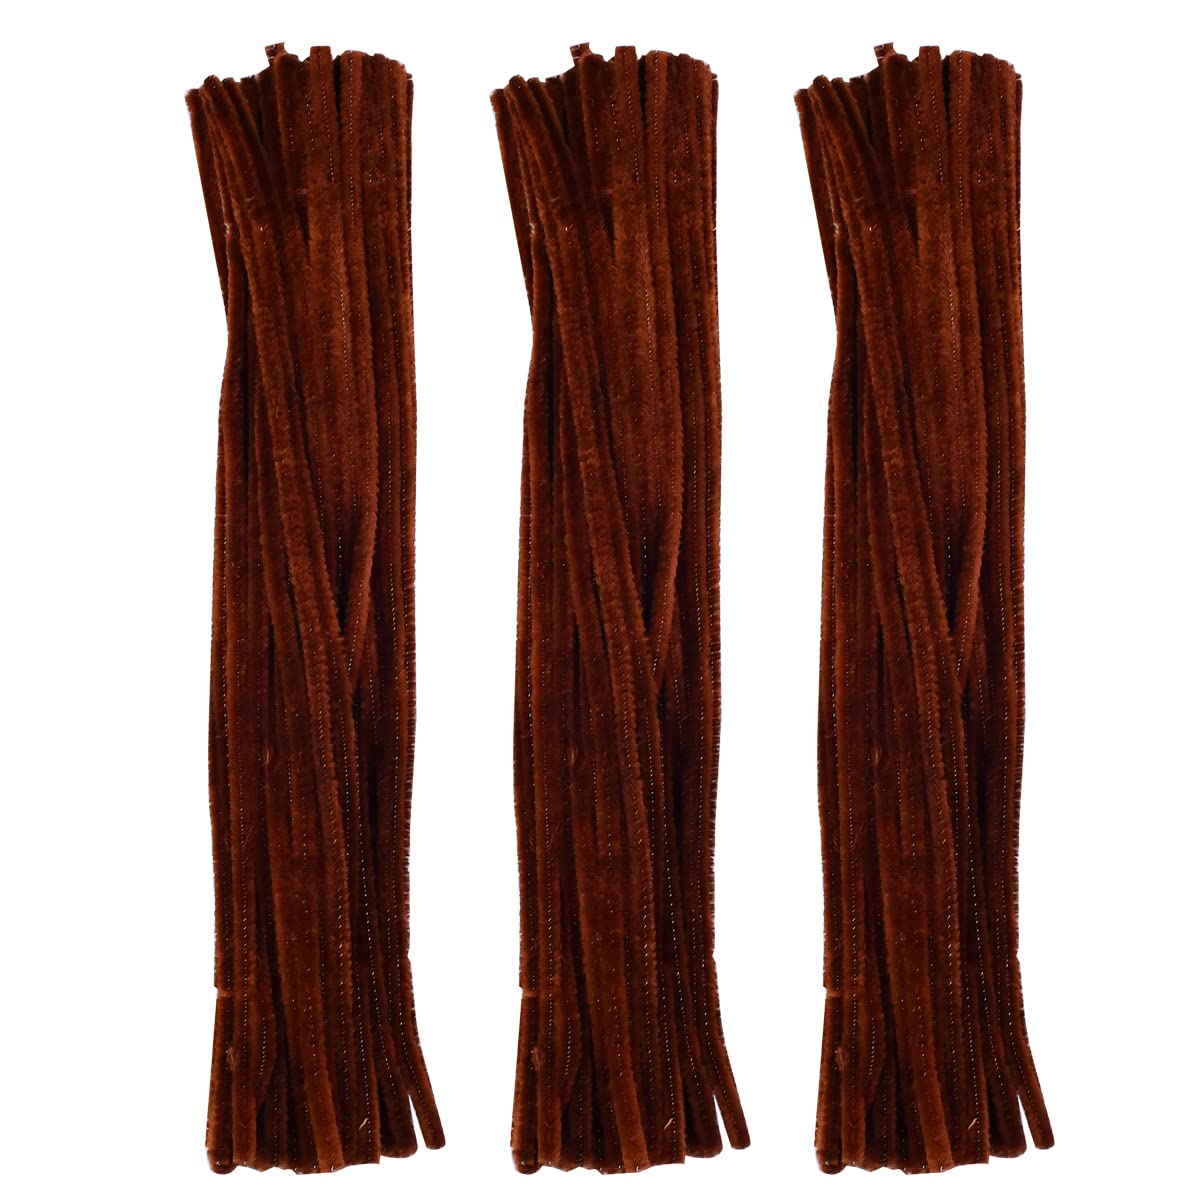 Enenes Pipe cleaners craft chenille Stems 6MM x 12 INcH Twistable Stems for  childrenAs crafts and Arts Bendable Sculpting Stick